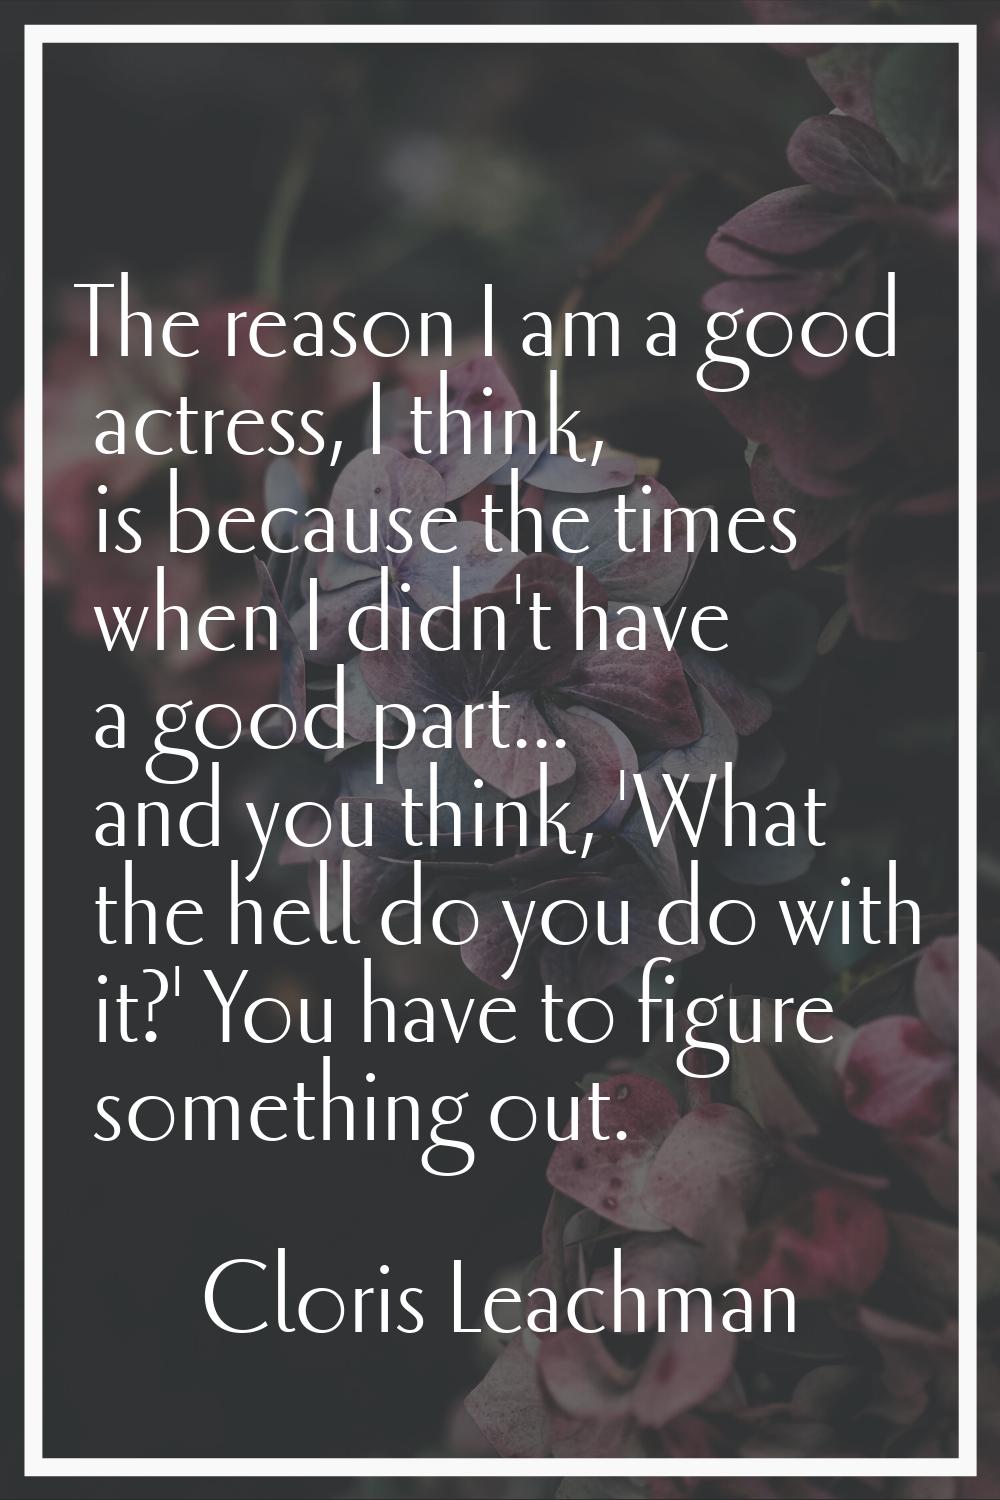 The reason I am a good actress, I think, is because the times when I didn't have a good part... and